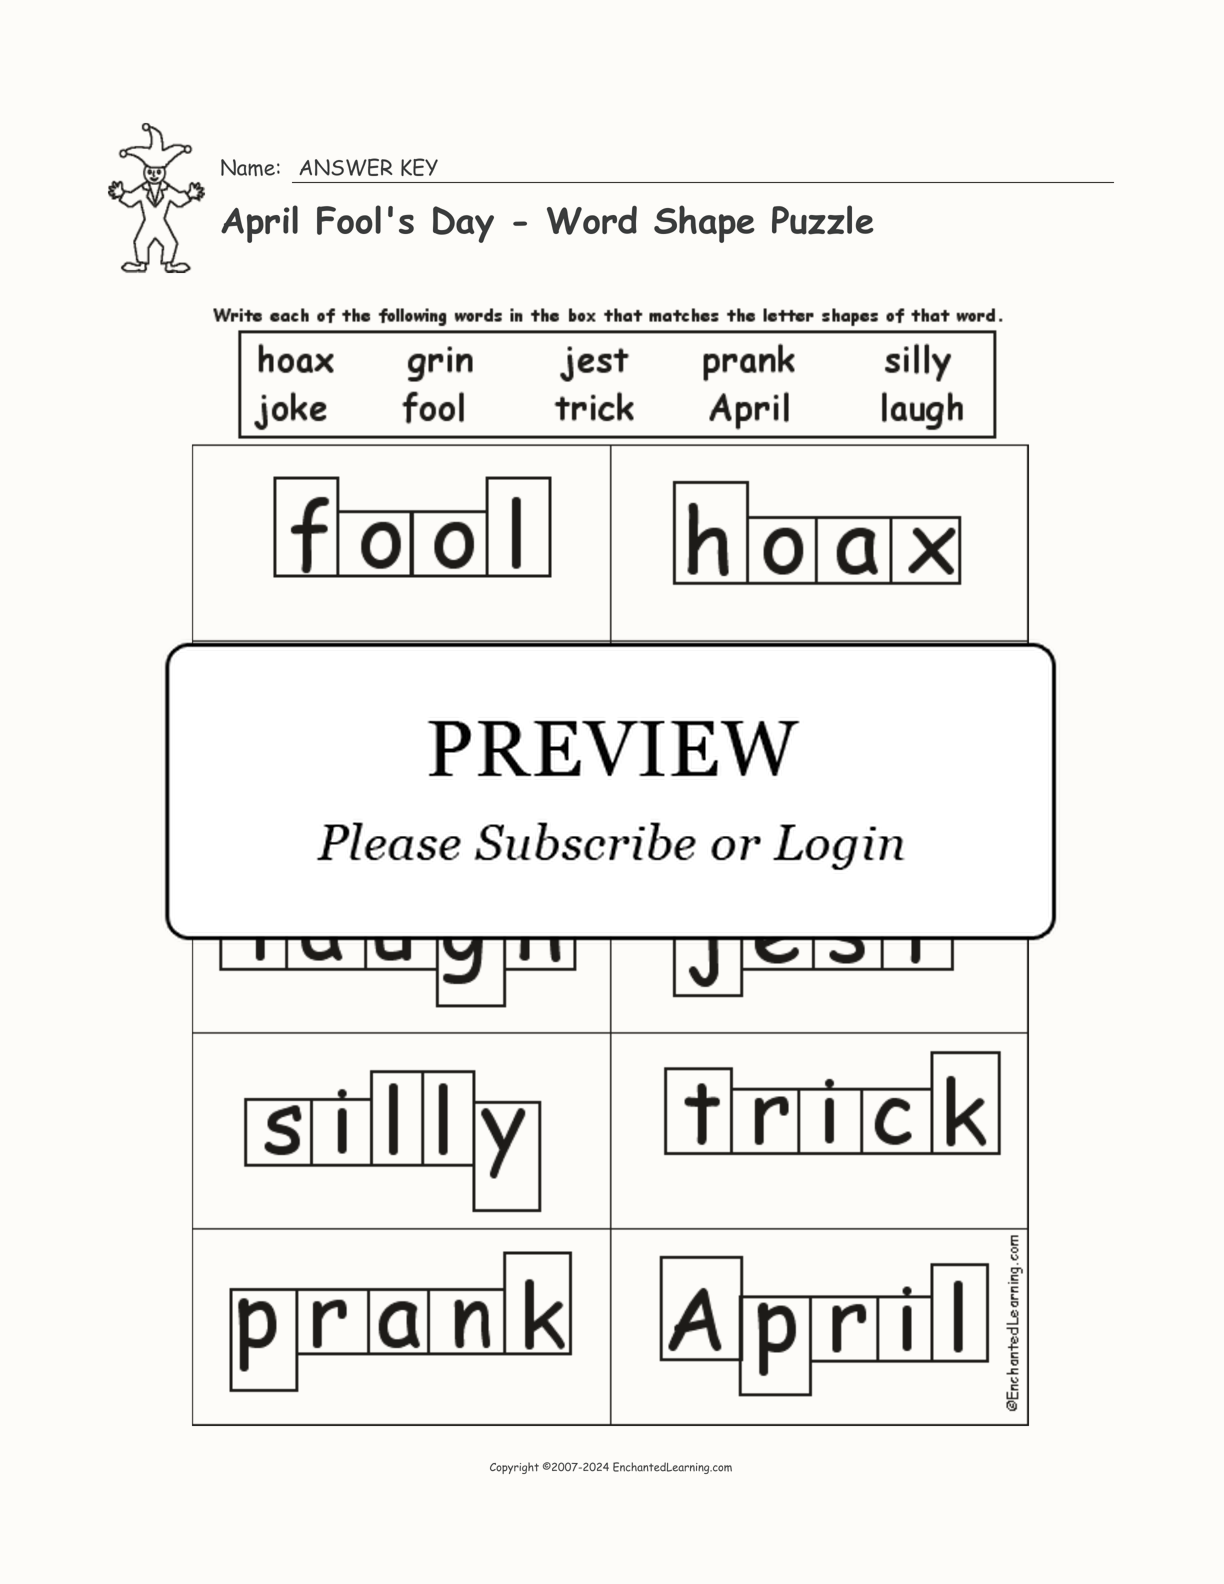 April Fool's Day - Word Shape Puzzle interactive worksheet page 2